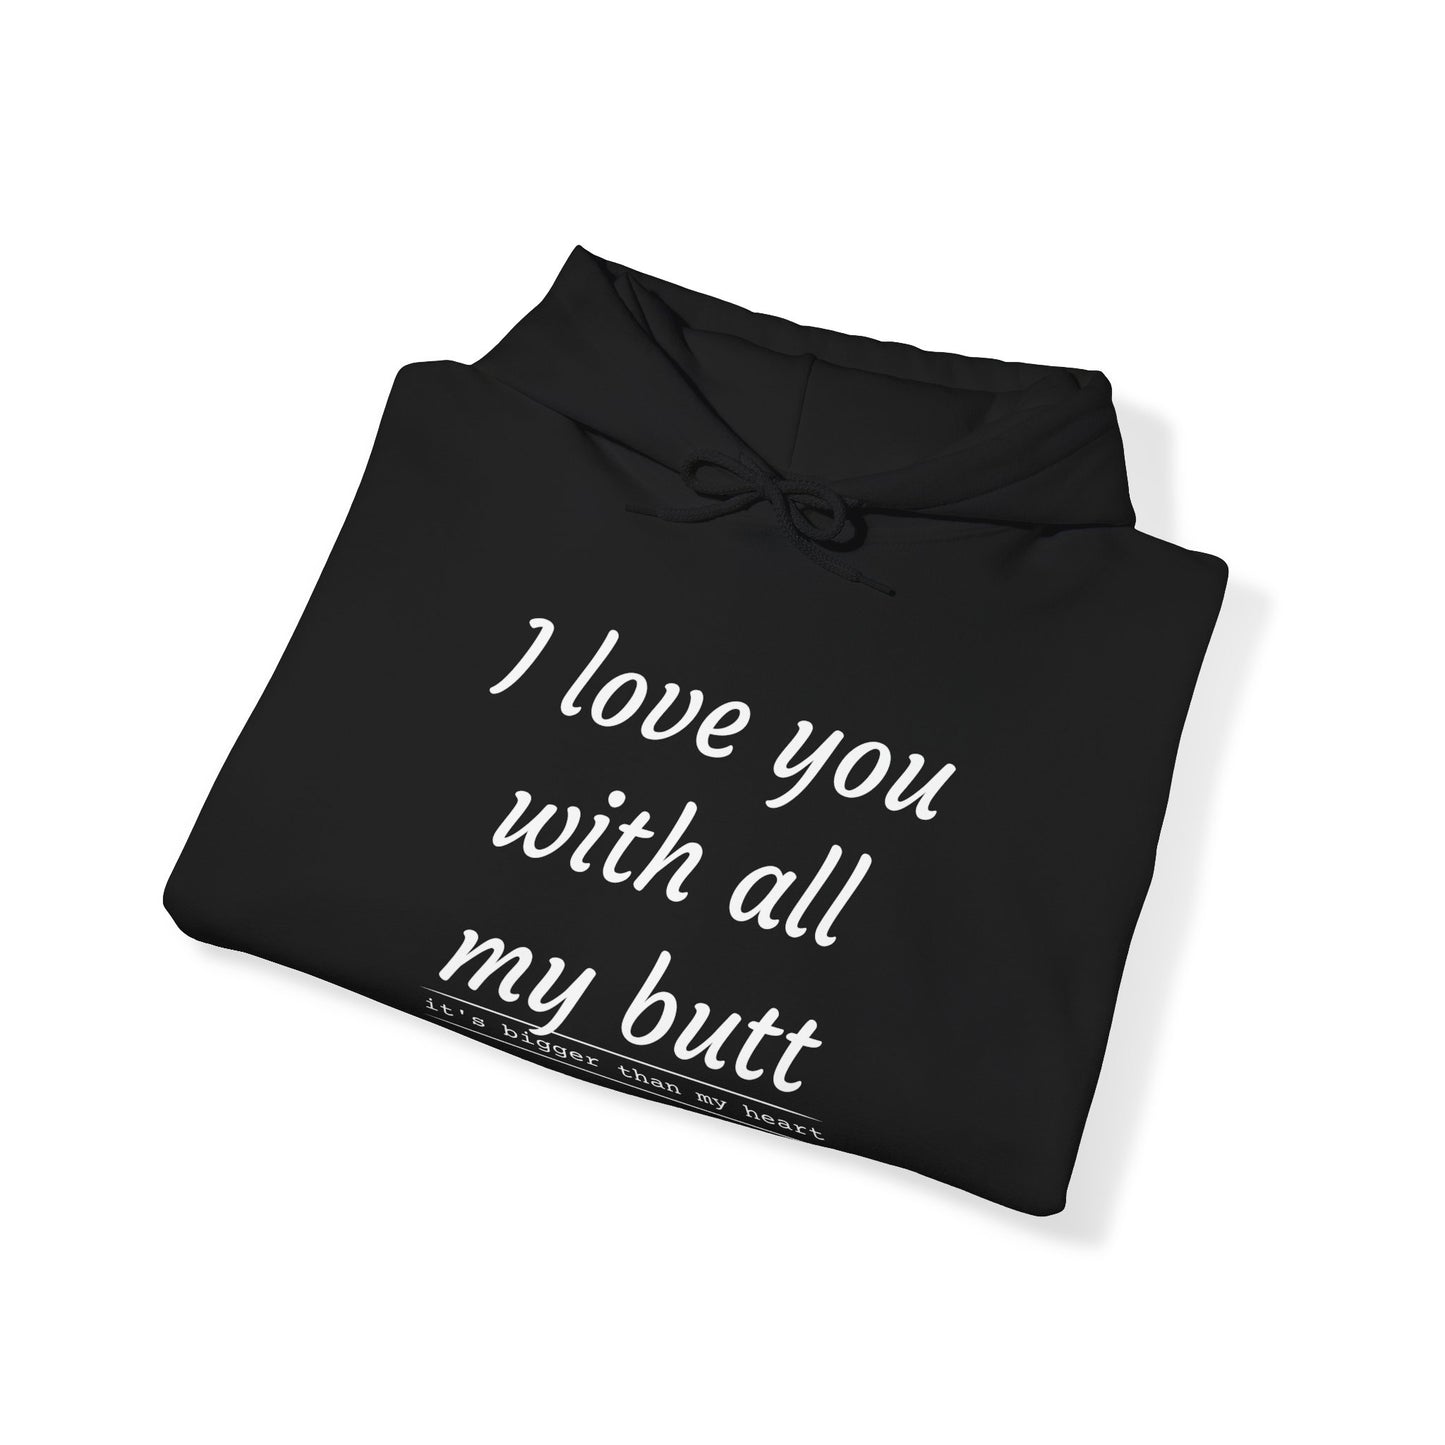 I Love You With All My Butt - Unisex Hooded Sweatshirt